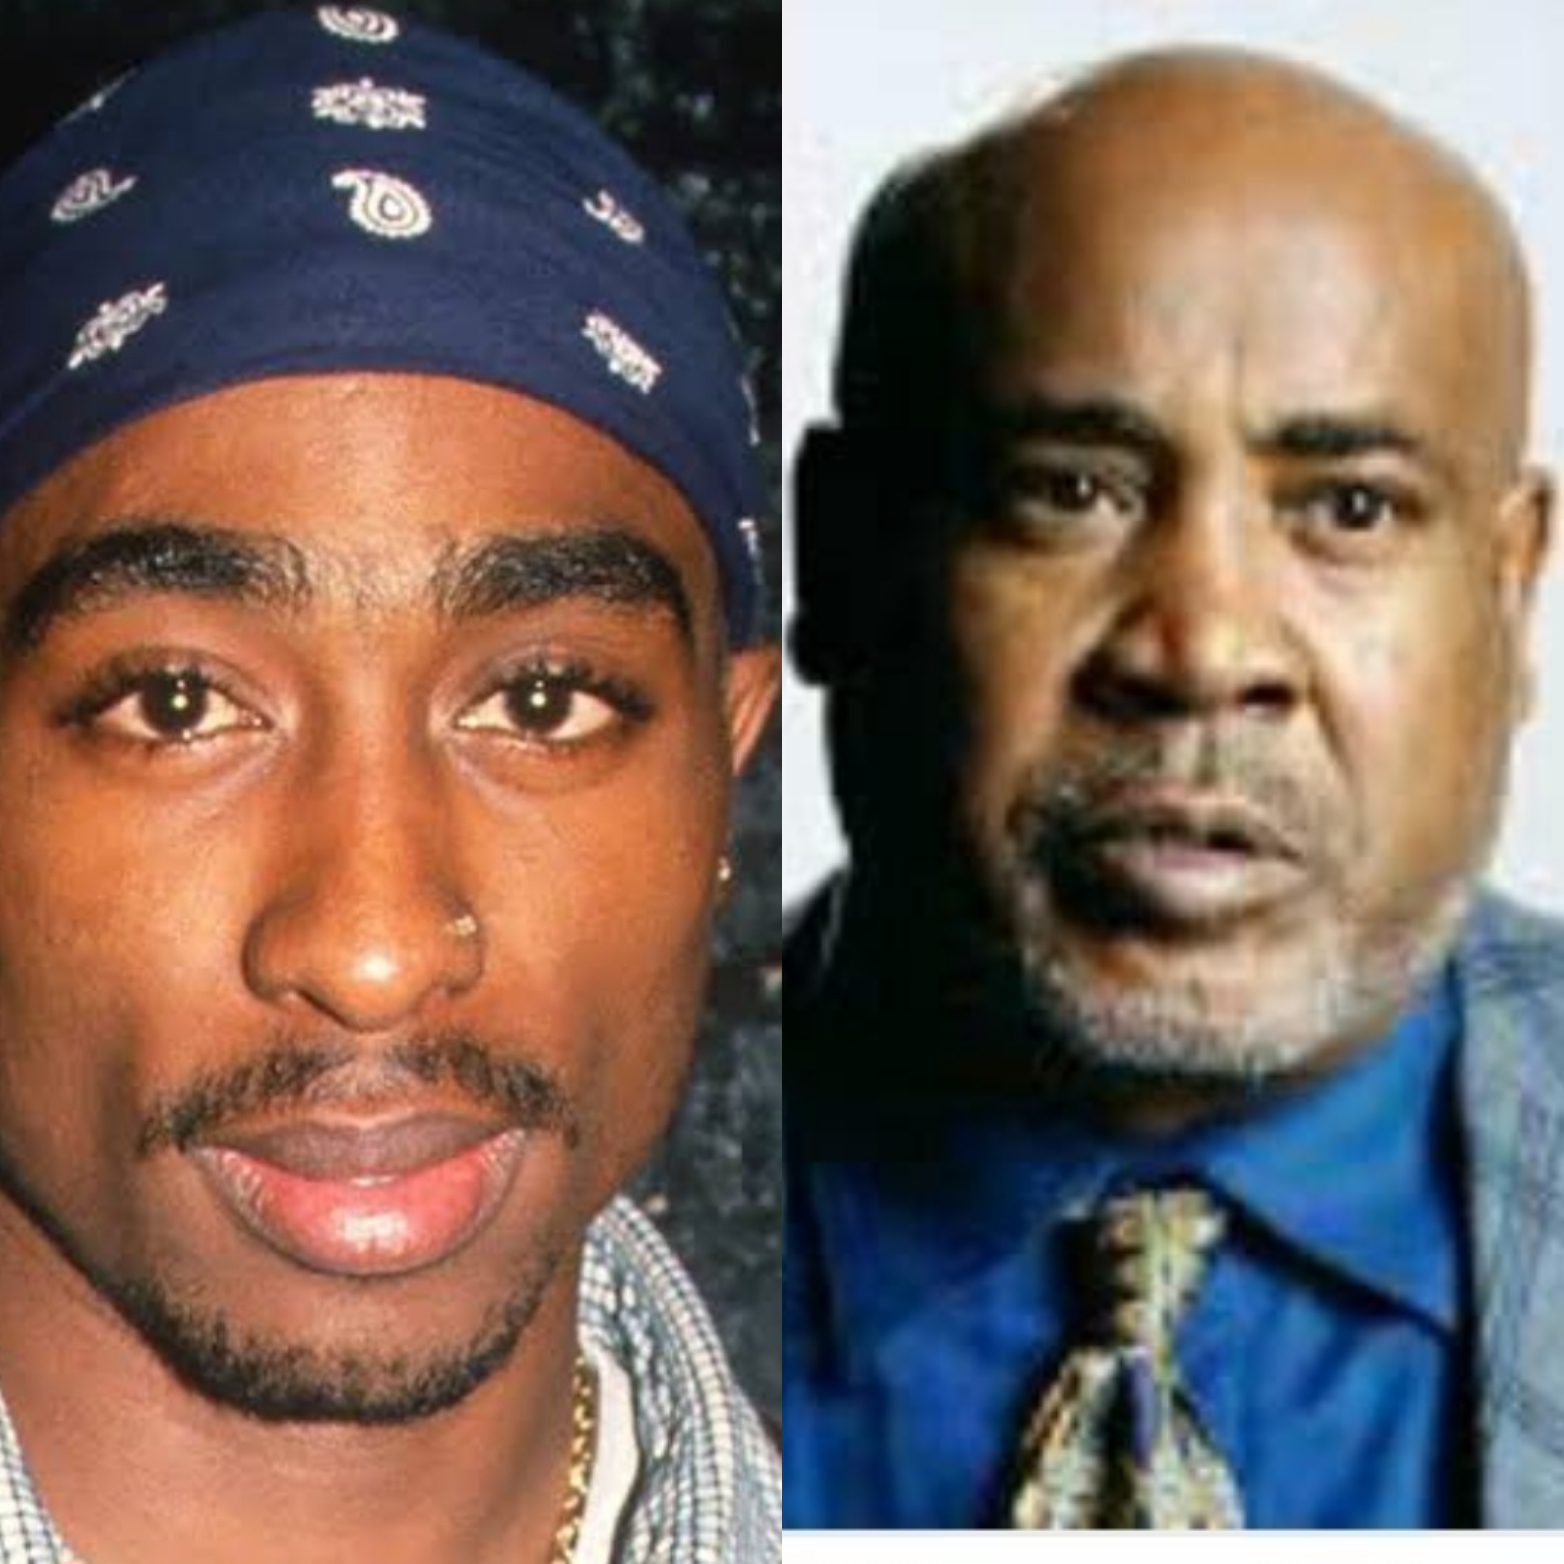 Suspect arrested in fatal shooting of Tupac Shakur